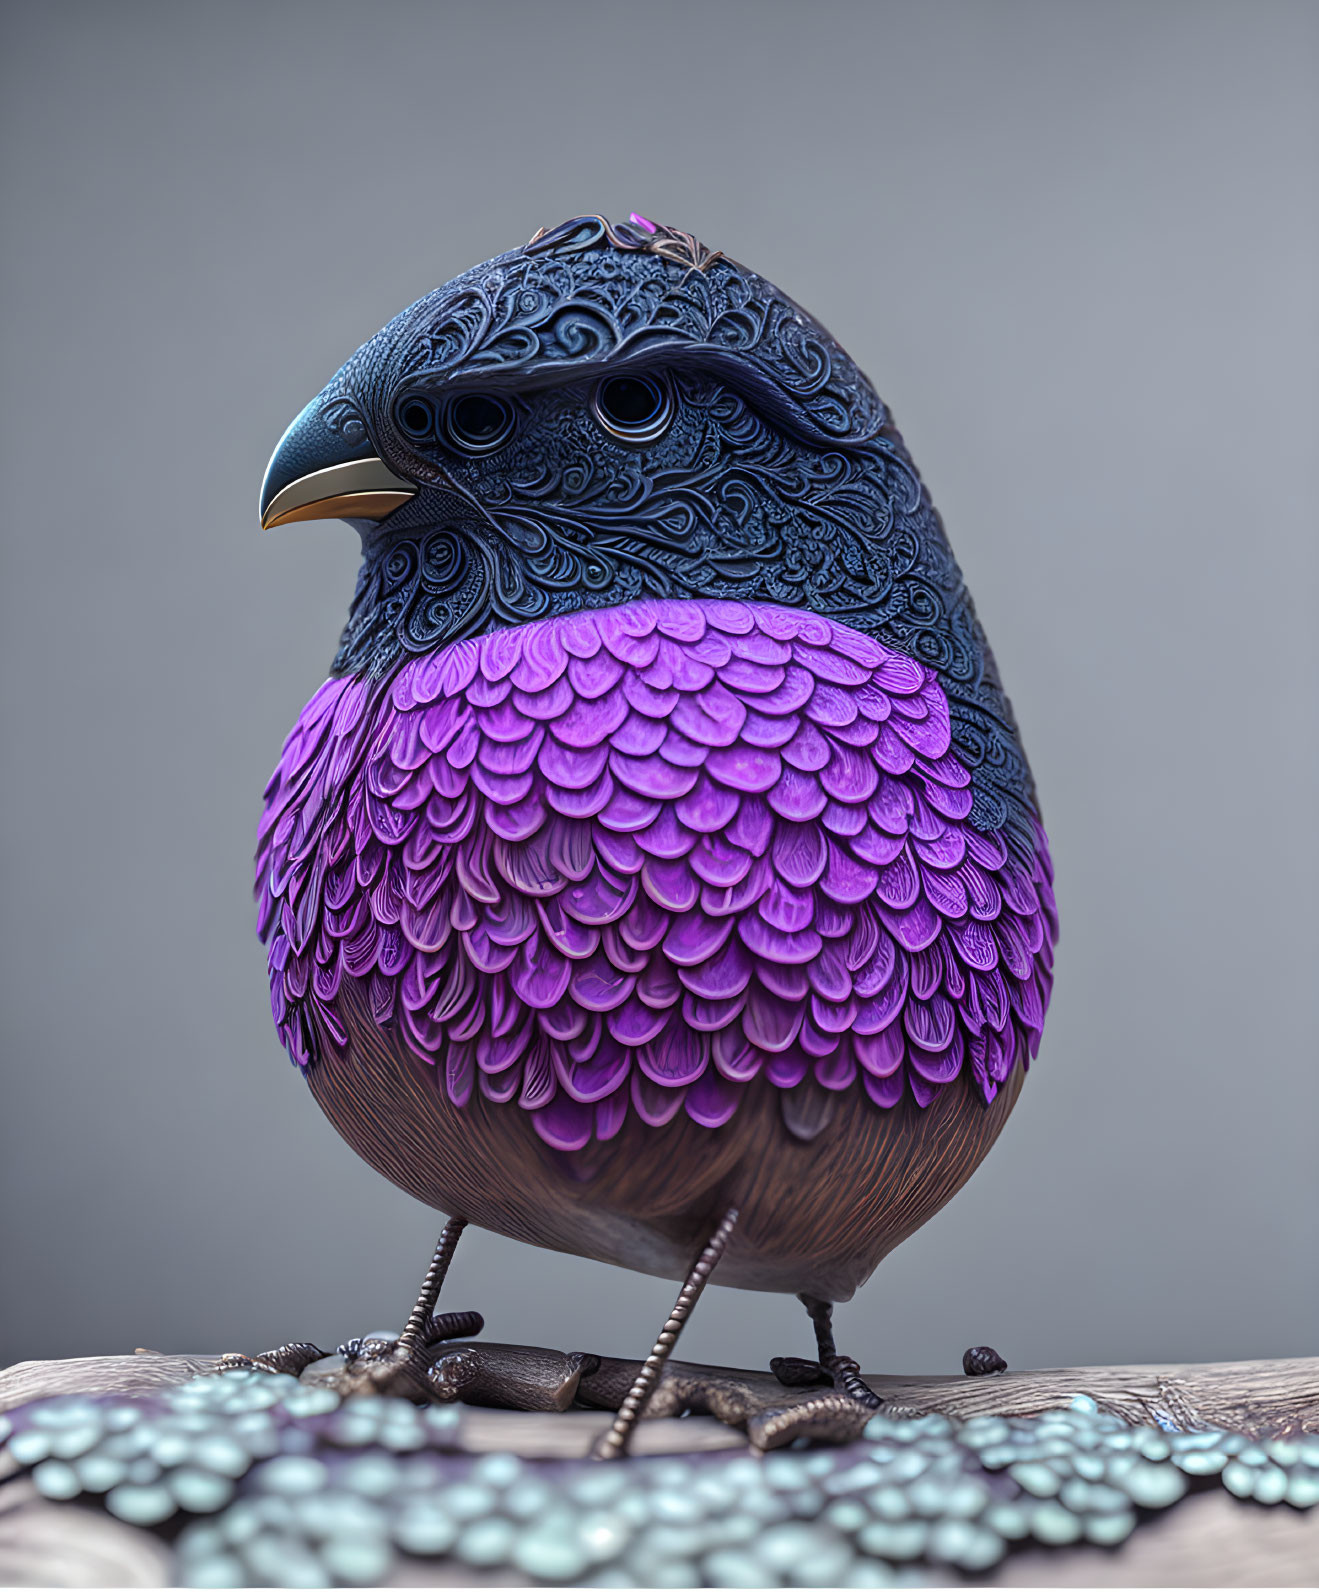 Vibrant Purple Bird with Intricate Patterns on Wooden Surface